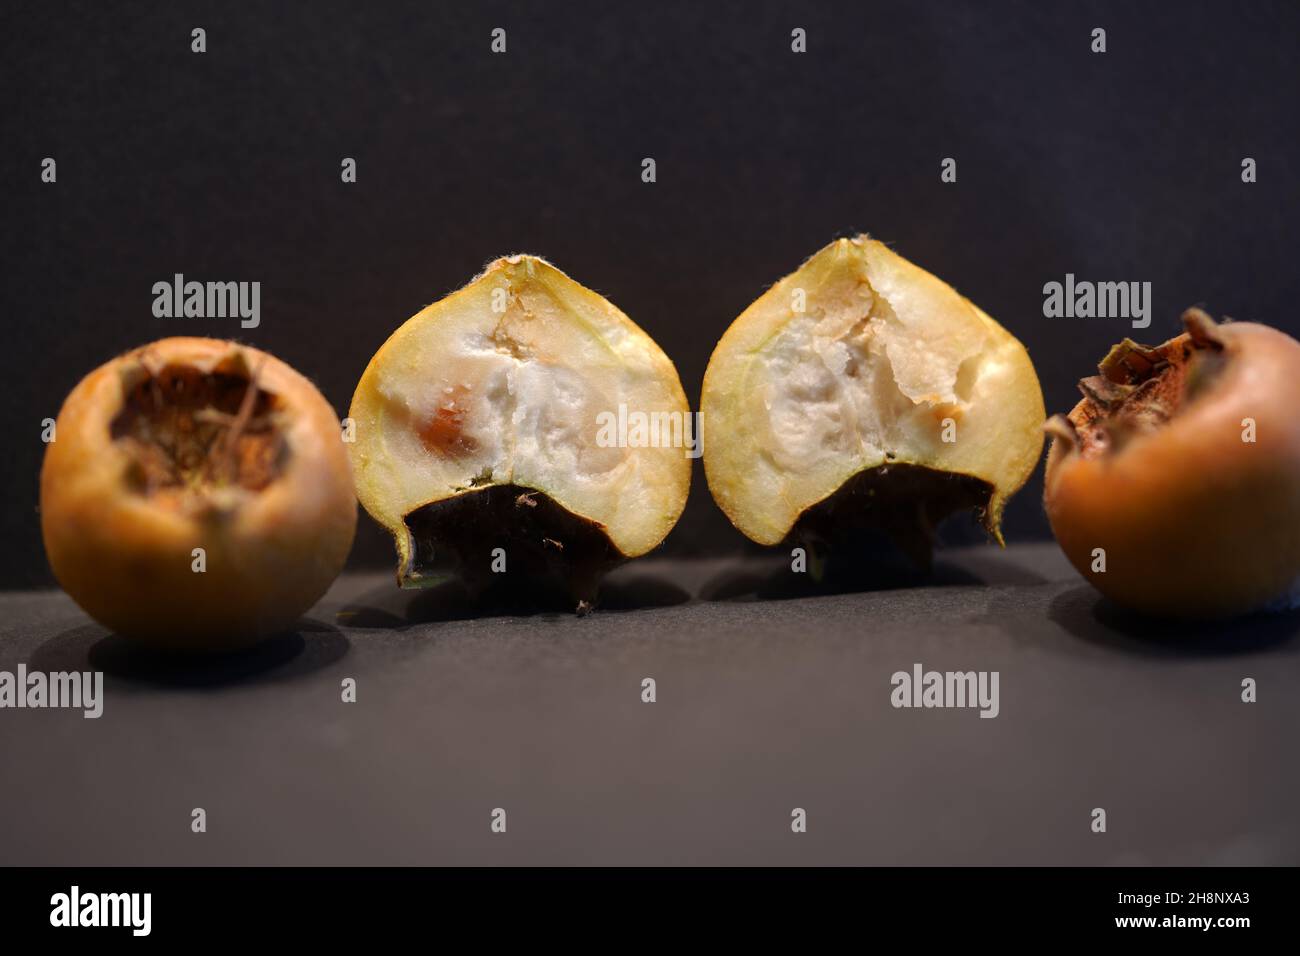 Edible medlar fruits (mespilus germanica, family rosaceae). Medlar fruit is available in winter and in being eaten when bletted. Cross section Mispel Stock Photo